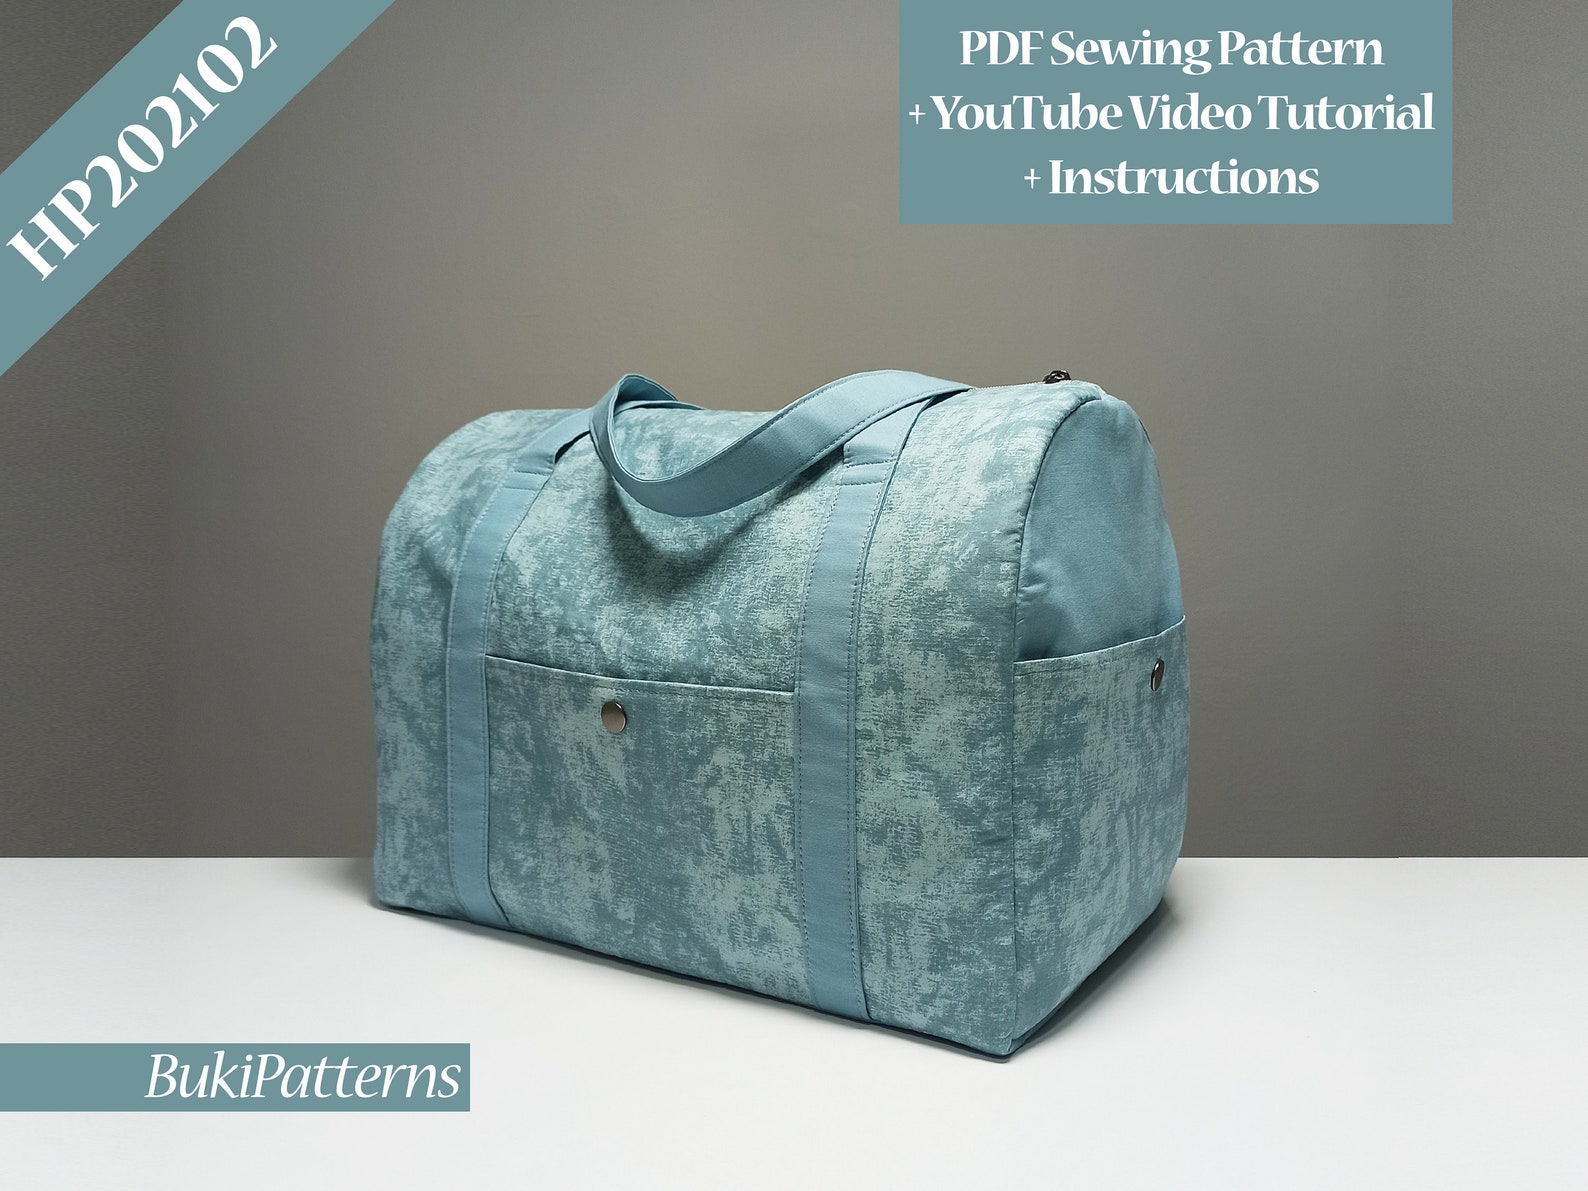 Big Boston Bag PDF Sewing Pattern With Youtube Video Tutorial | Etsy